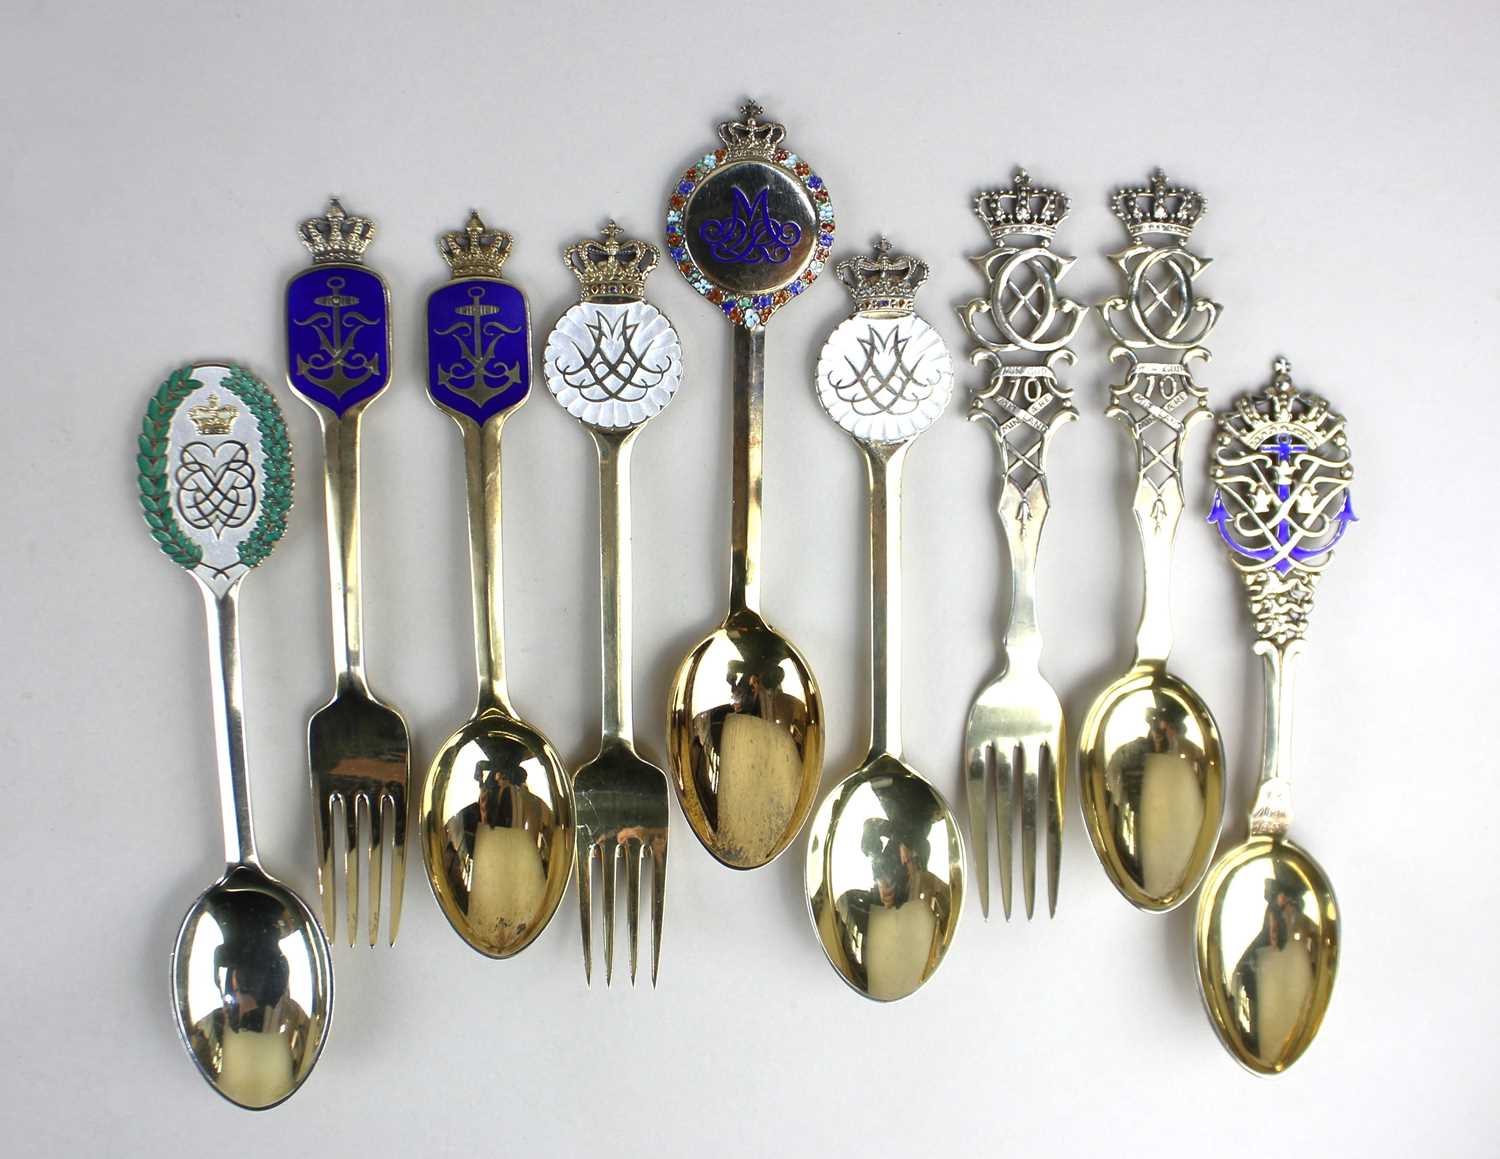 A collection of nine Danish enamelled silver-gilt Royal Commemorative spoons, including examples